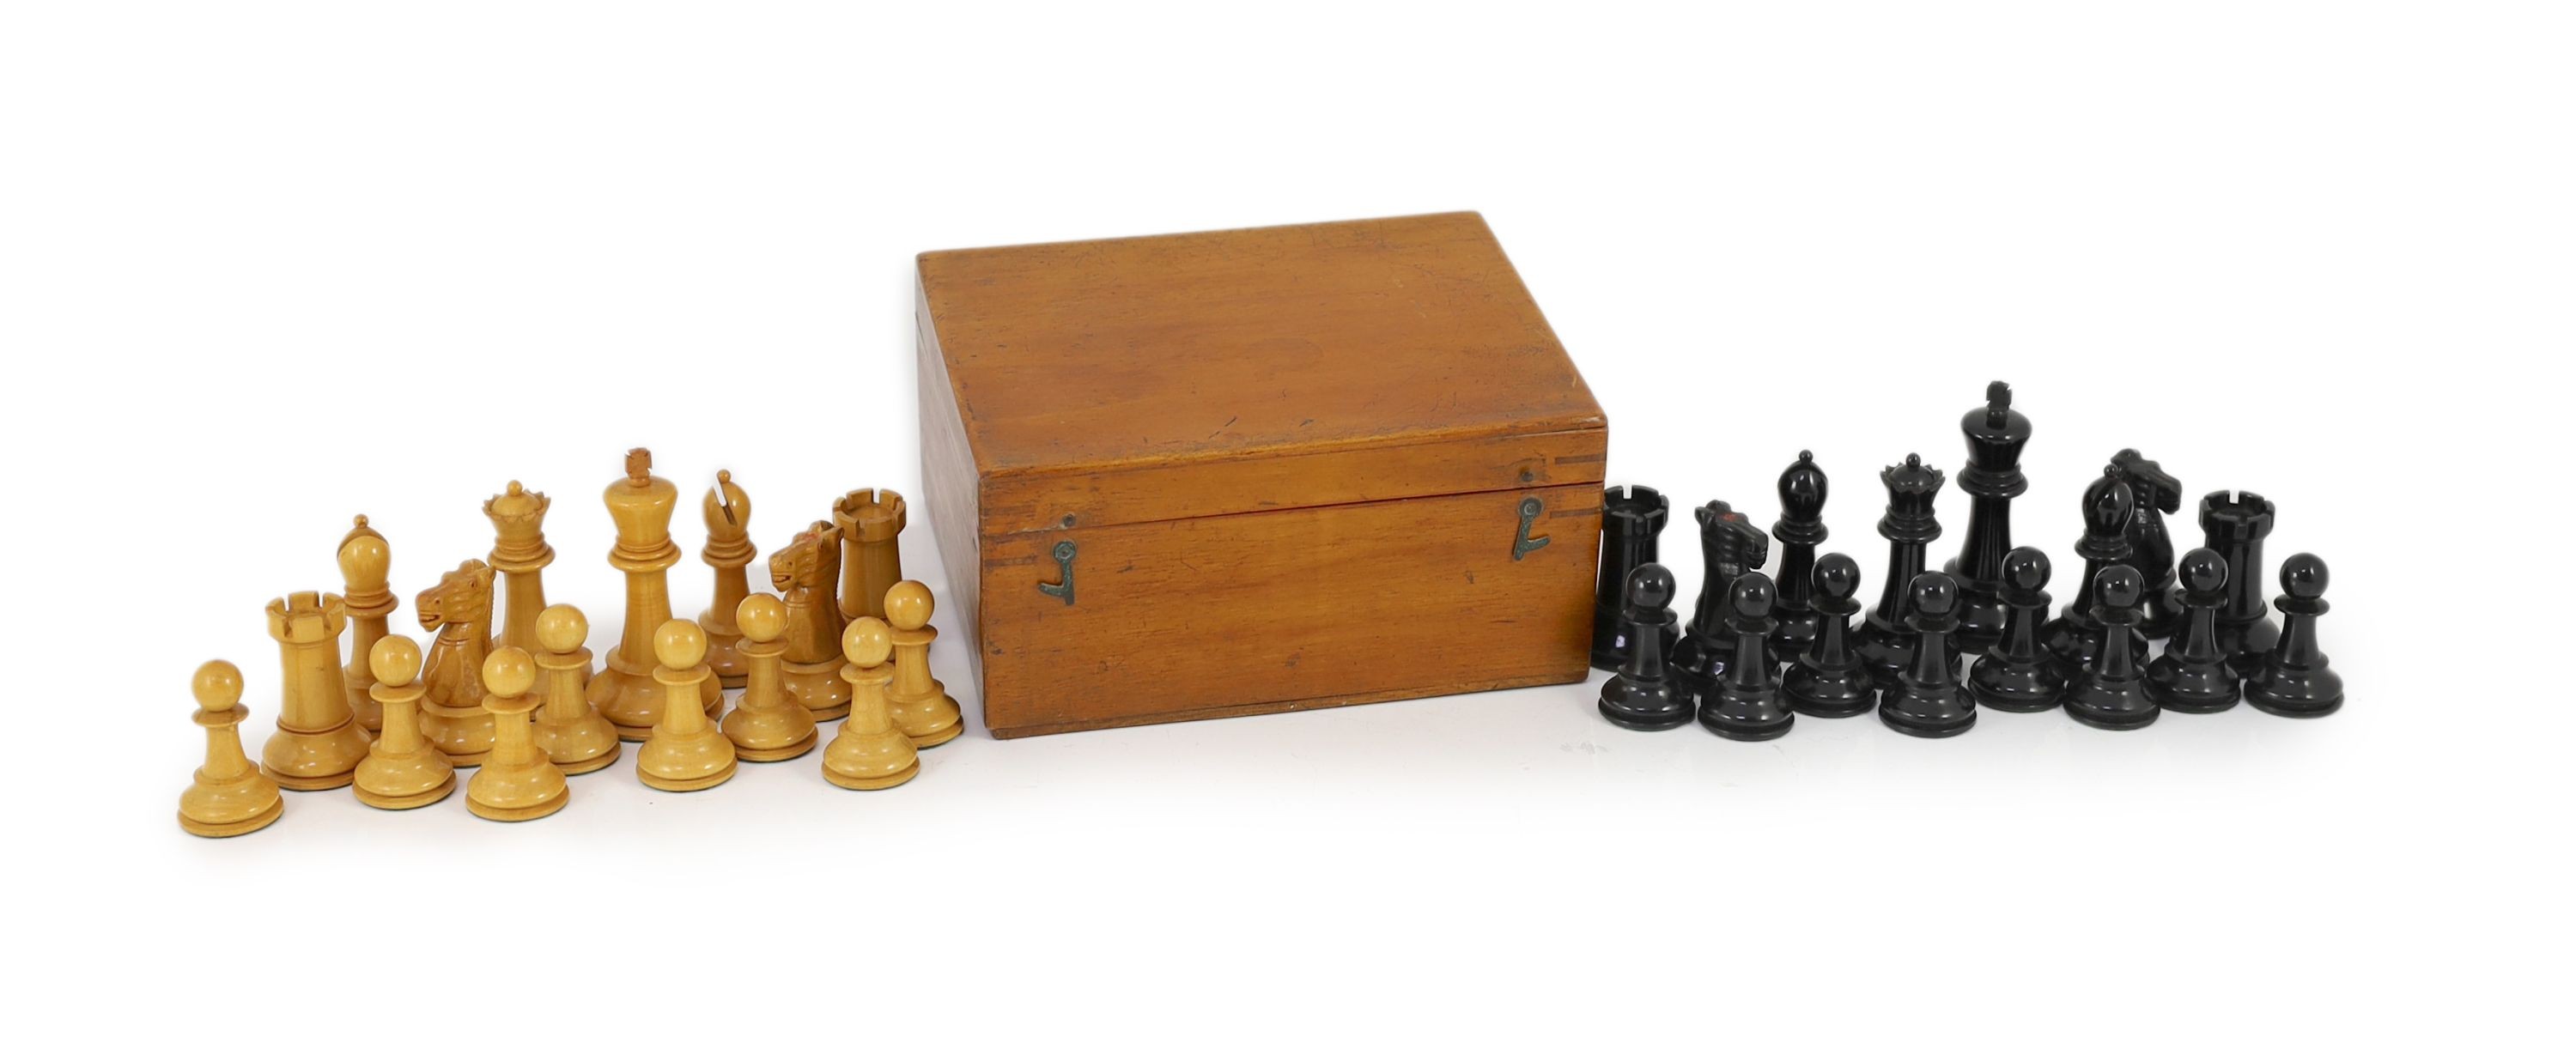 A Jaques & Son Ltd, London 4 in. club size Staunton boxwood and ebony chess set.                                                                                                                                            